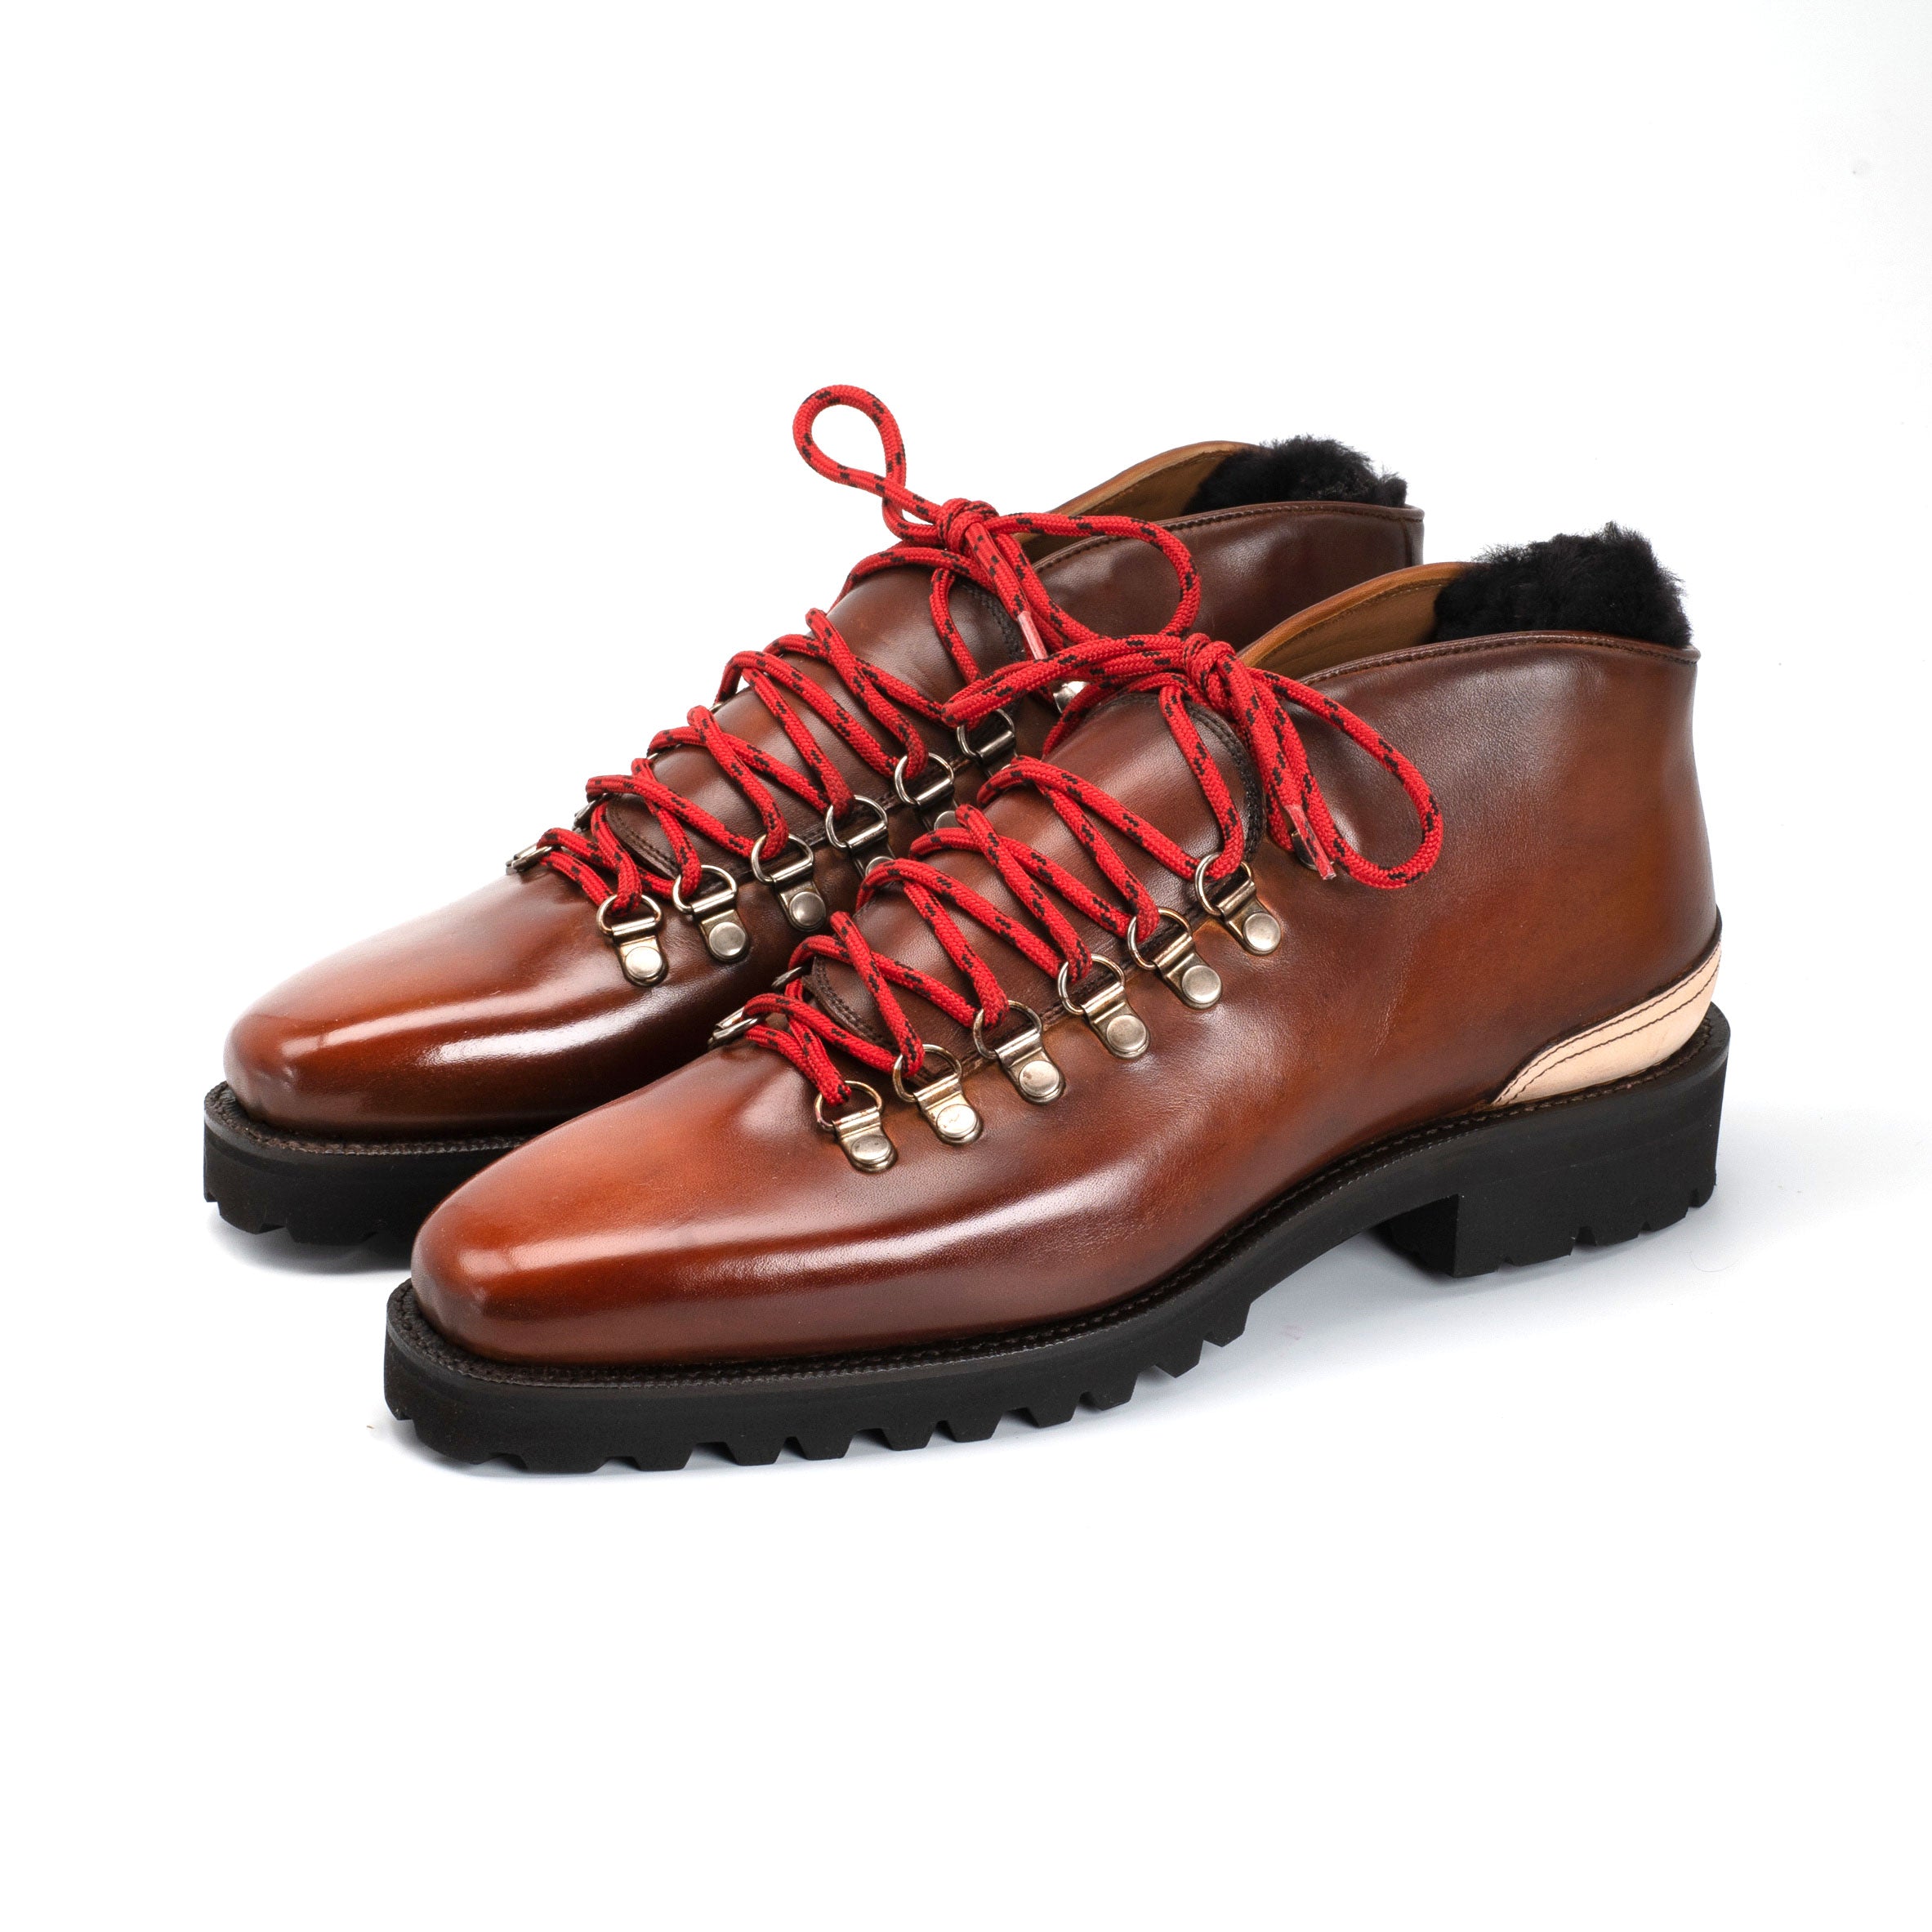 Borcego Mountain Boot by Norman Vilalta Men's Boots in Barcelona, Spain